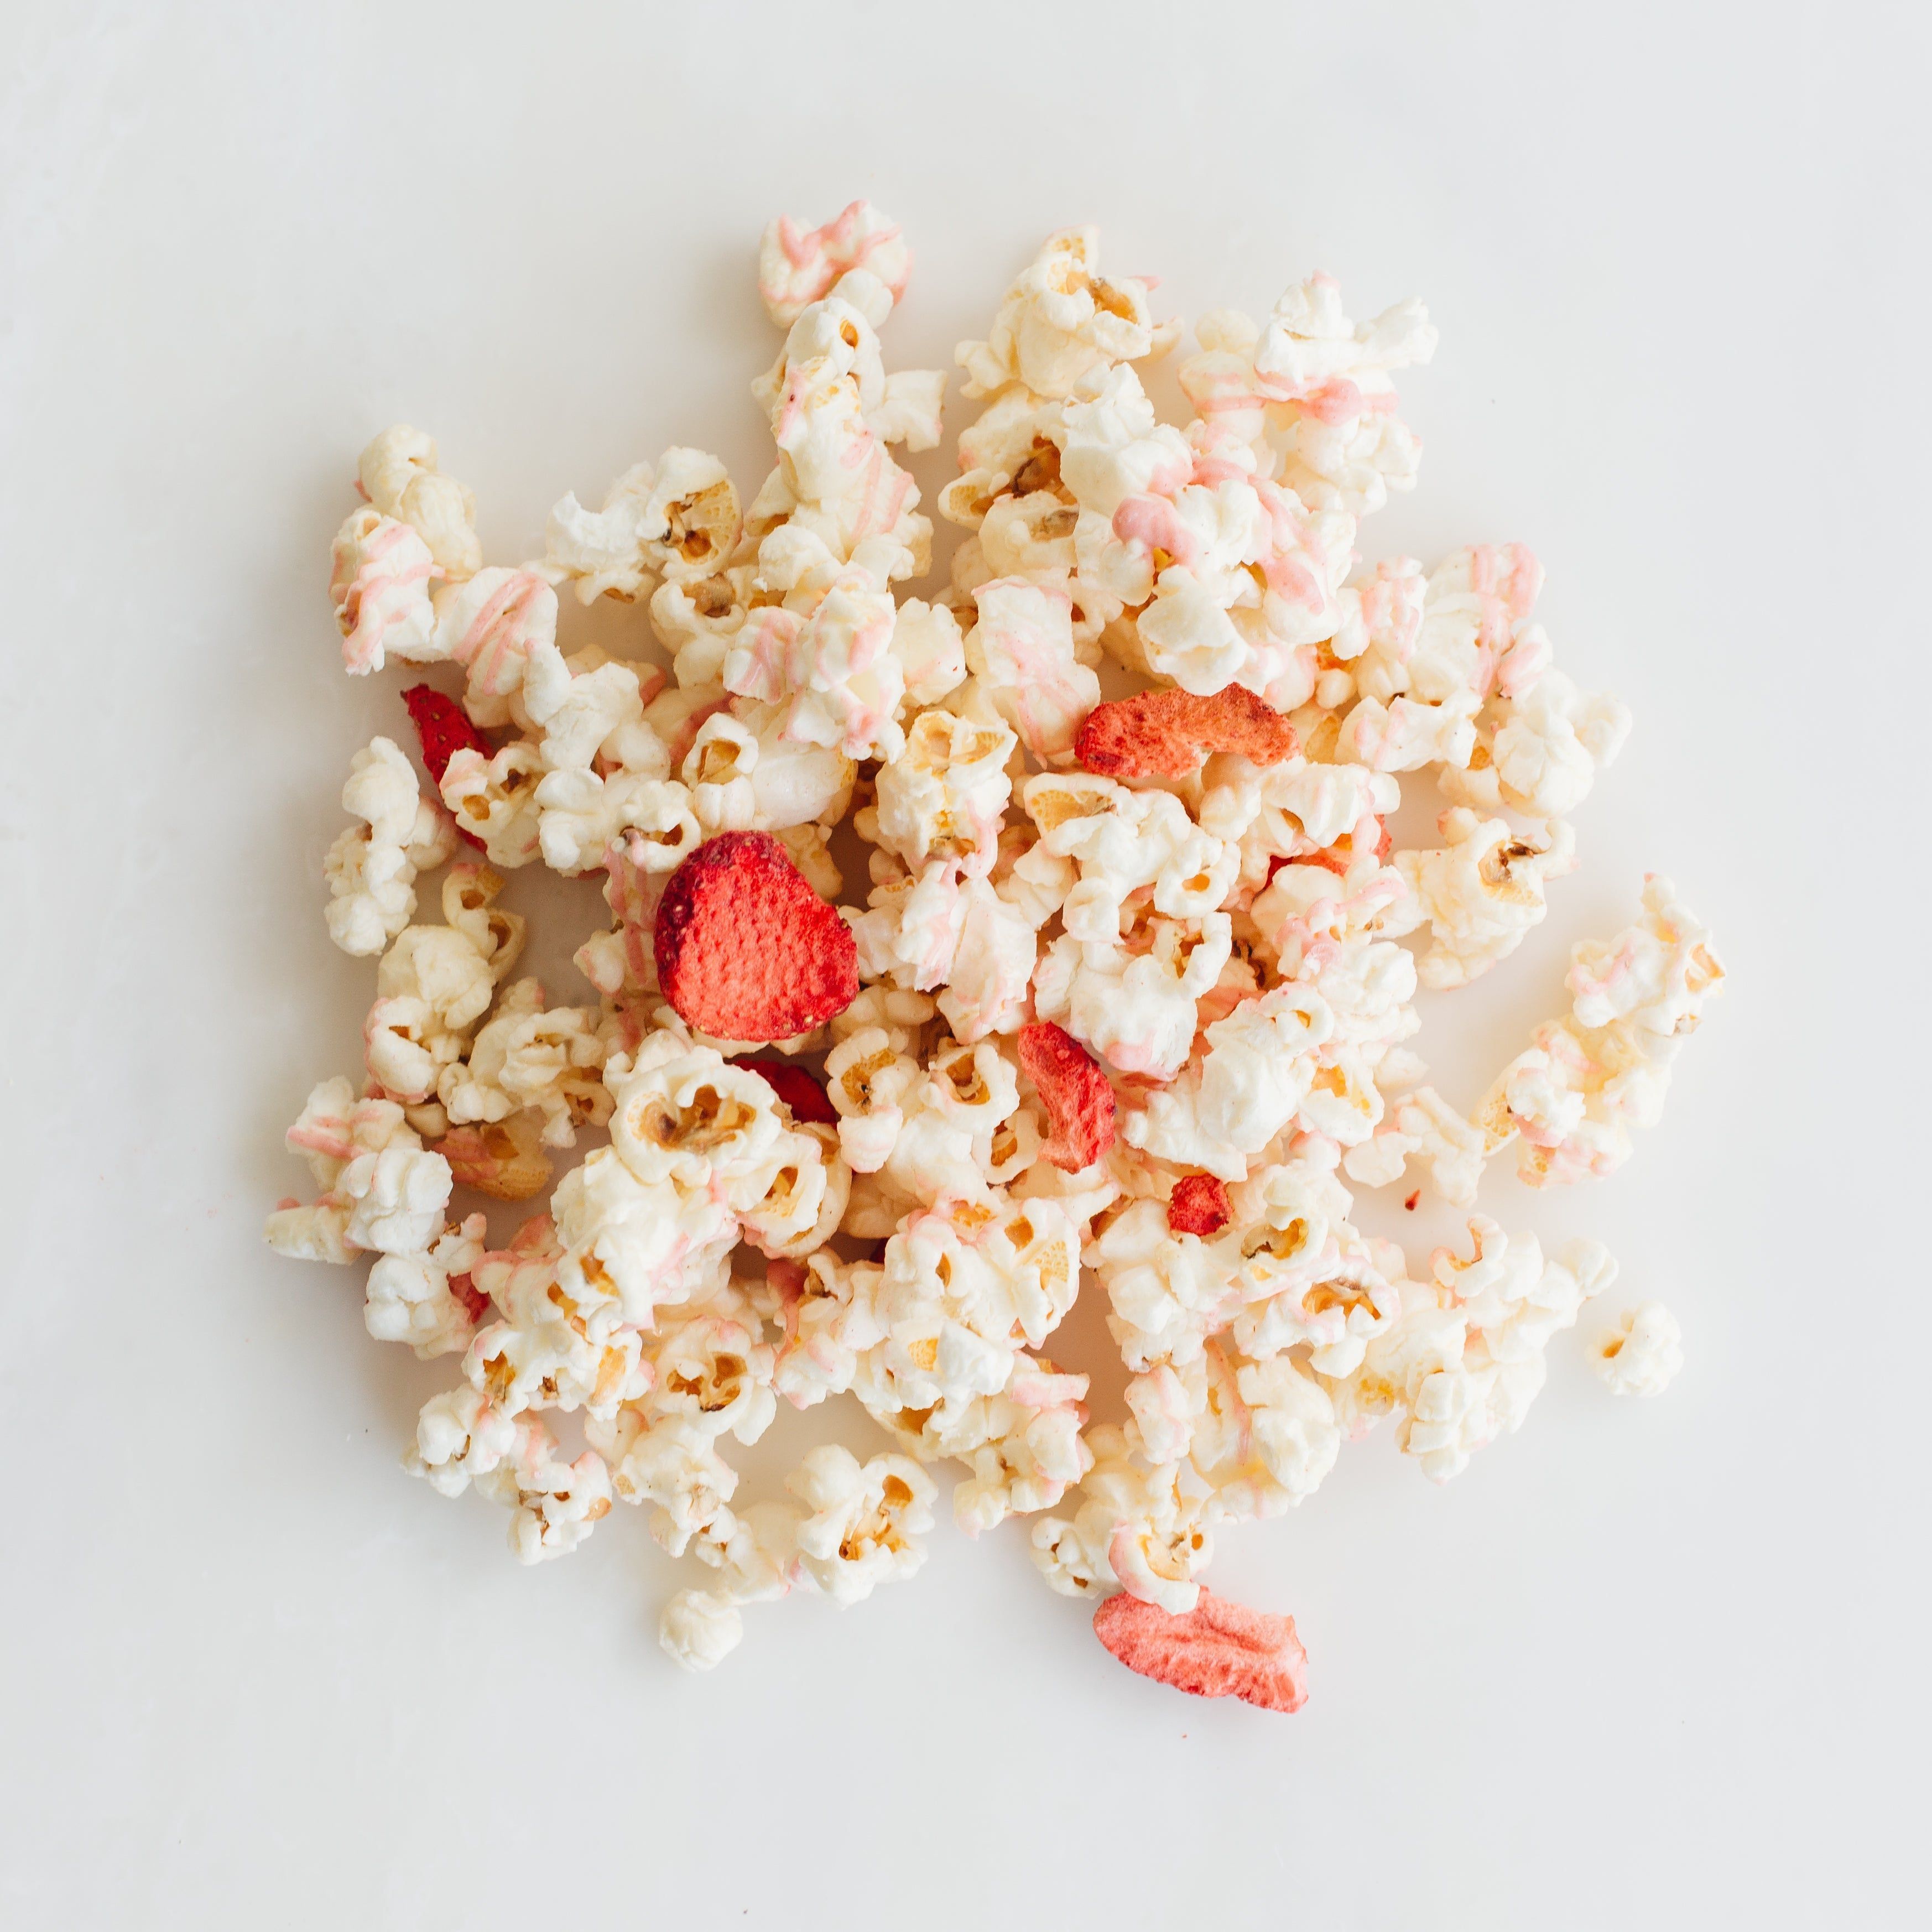 A pile of popcorn with a few strawberry pieces mixed in. - Popcorn